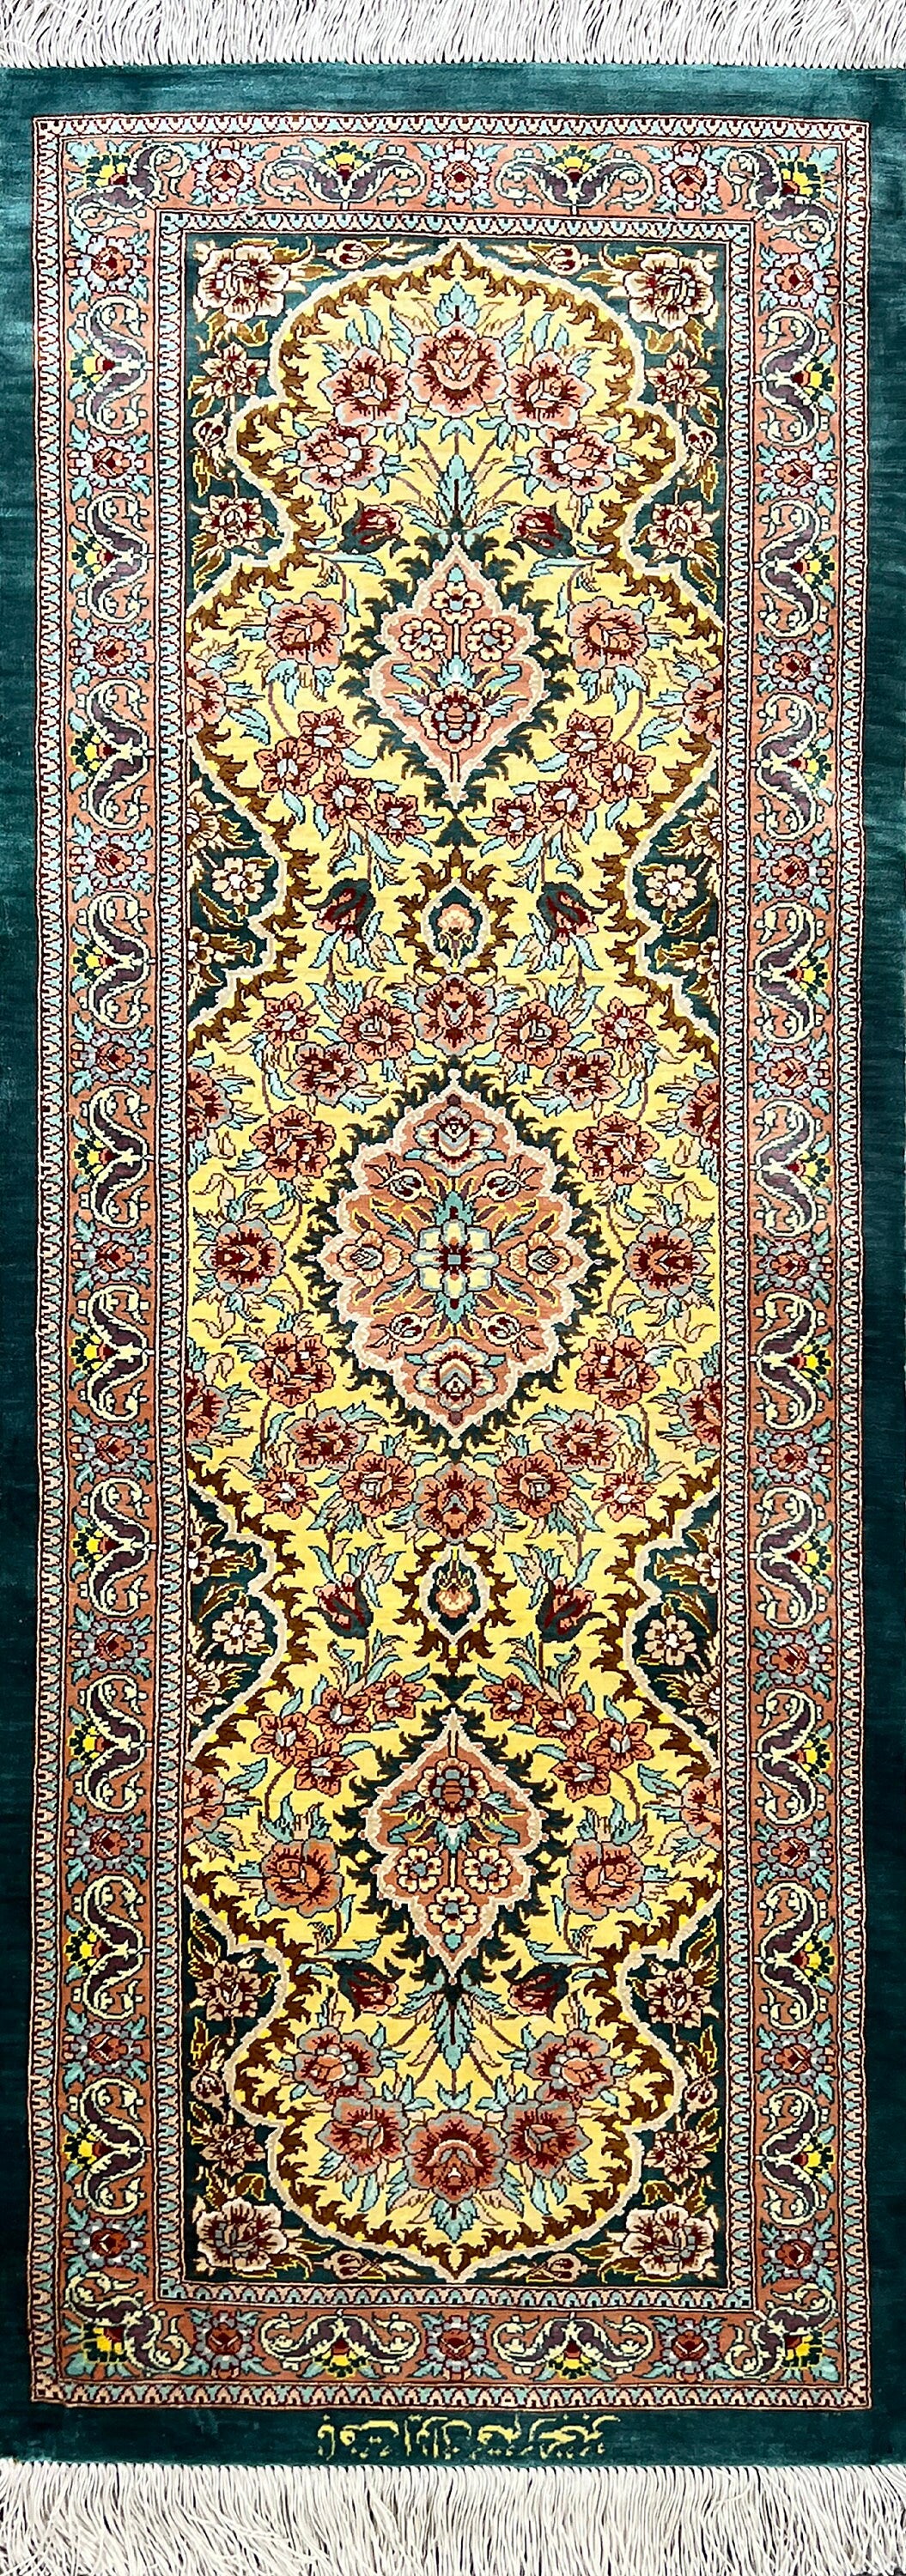 Ghoum Silk Rug | 3'11" x 1'4" | Home Decor | Hand-knotted Area Rug